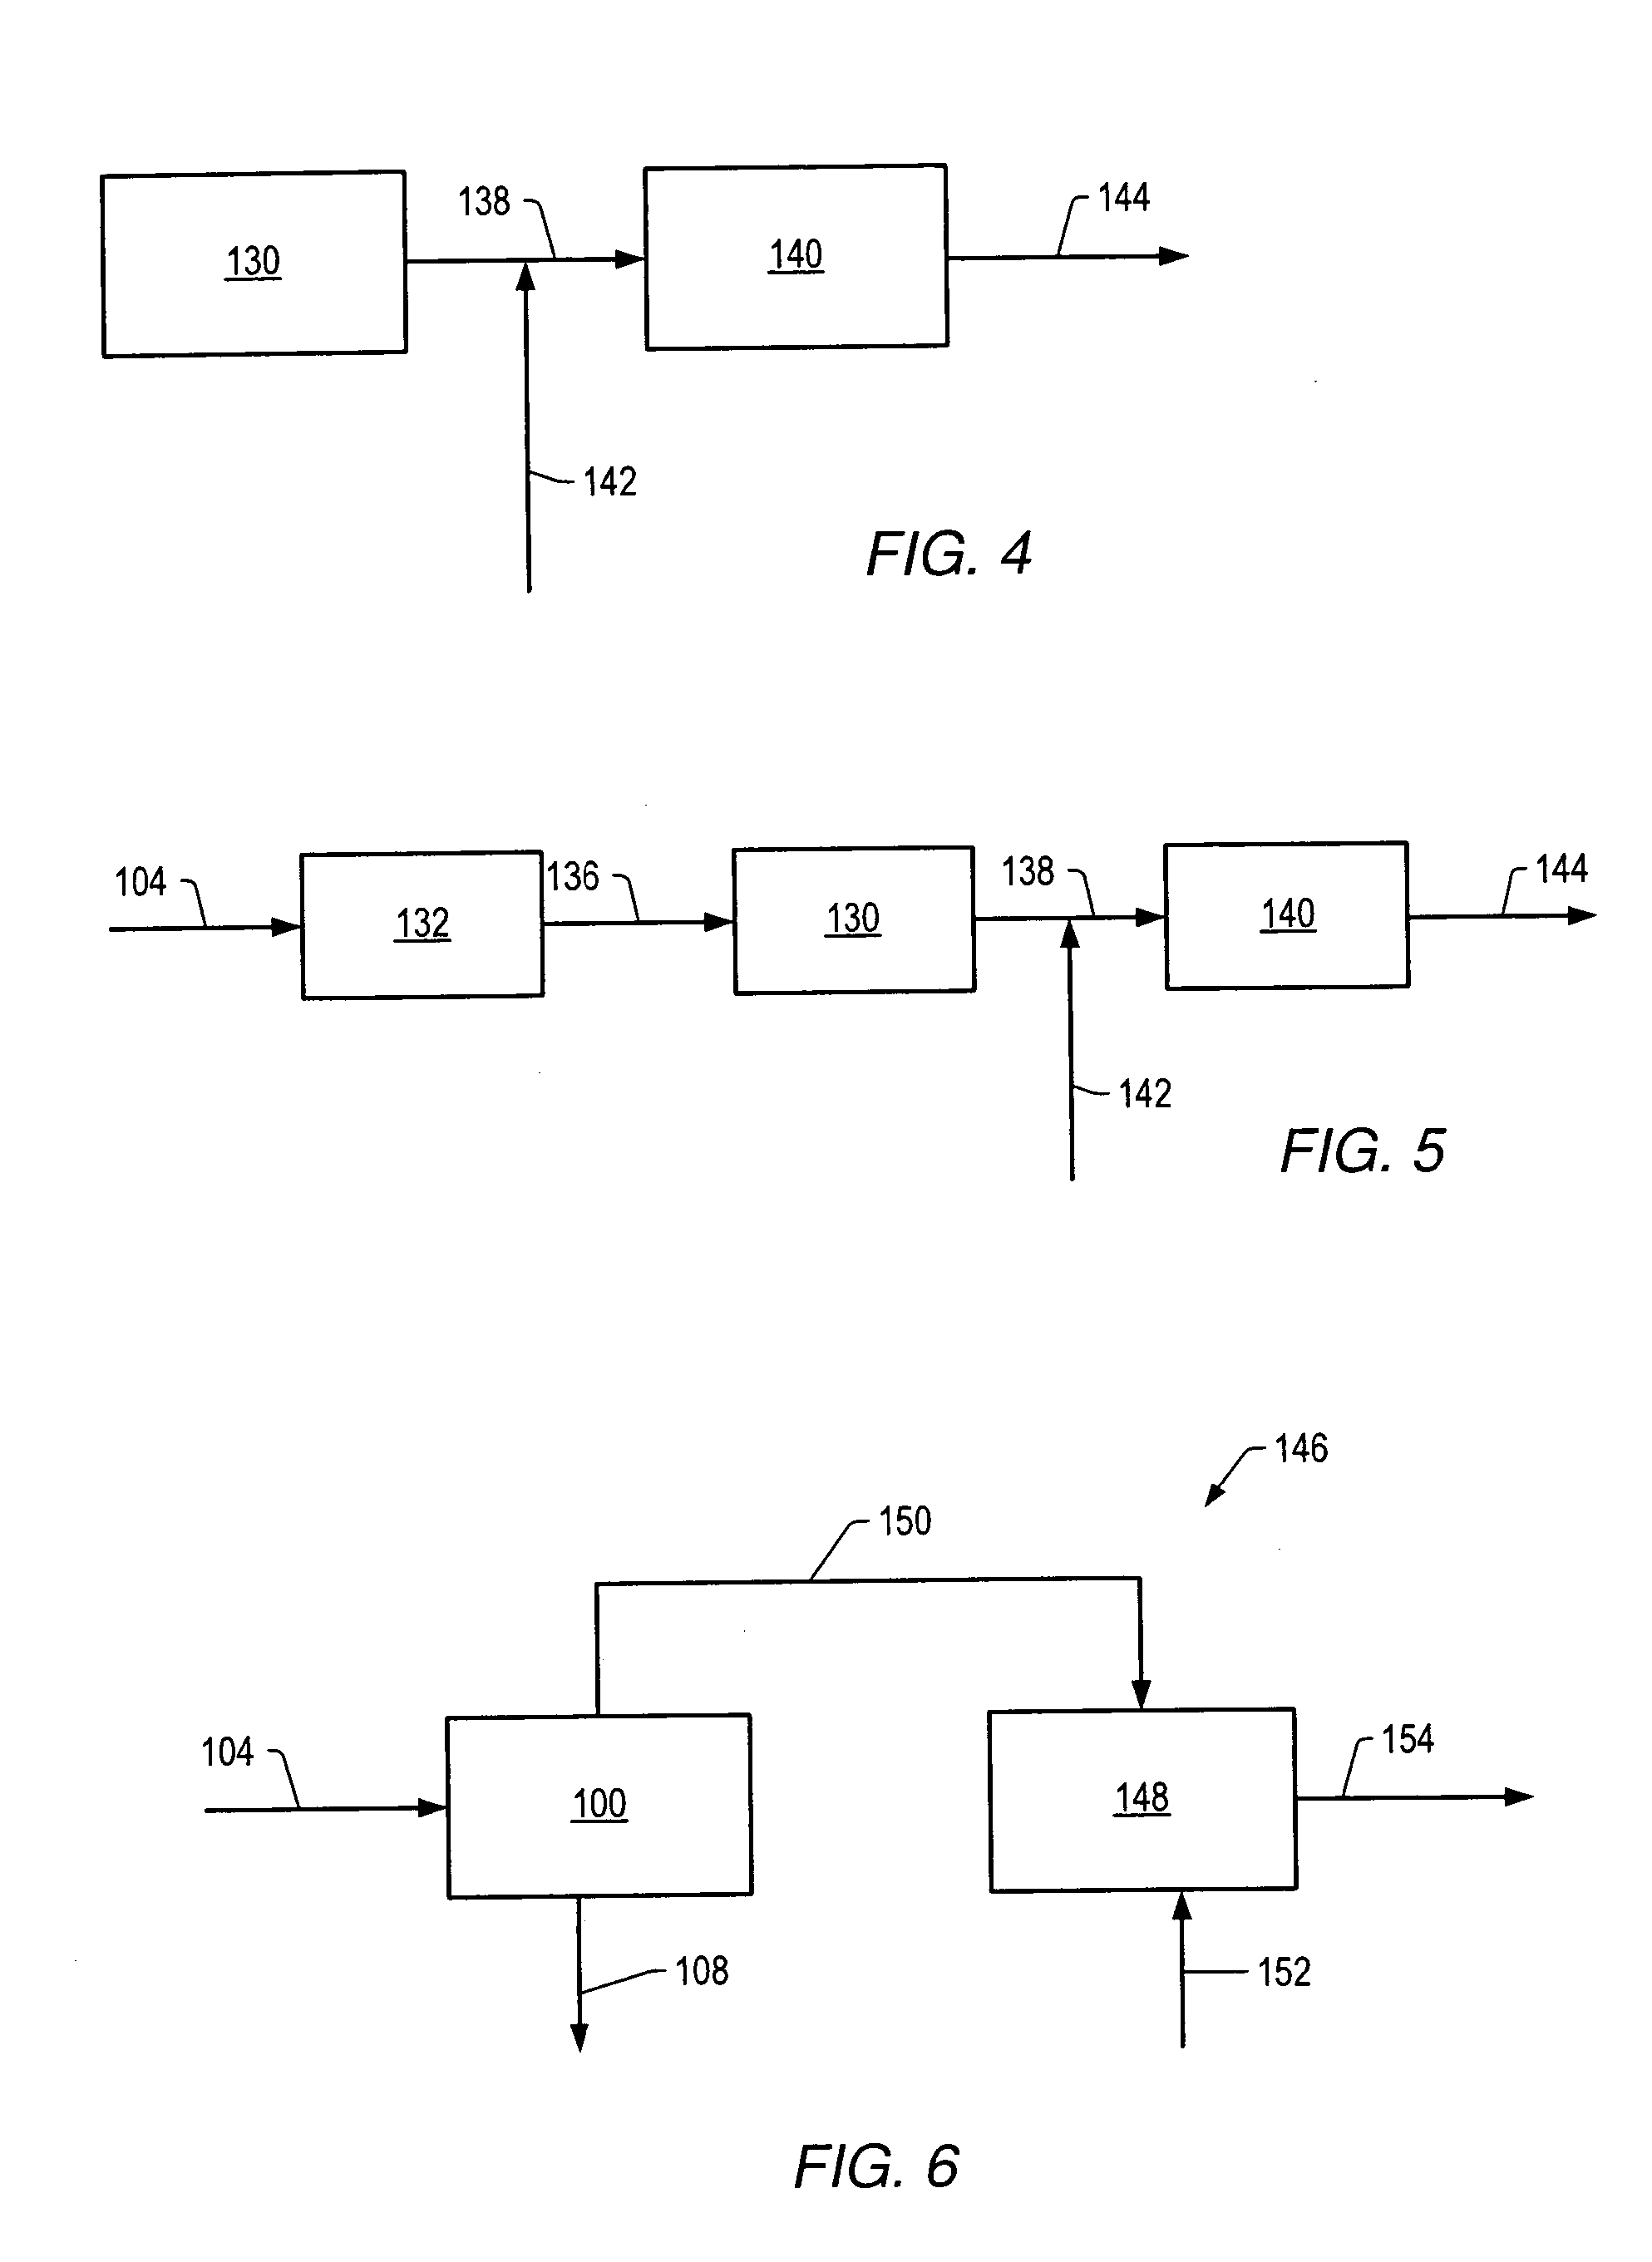 Systems and methods of producing a crude product